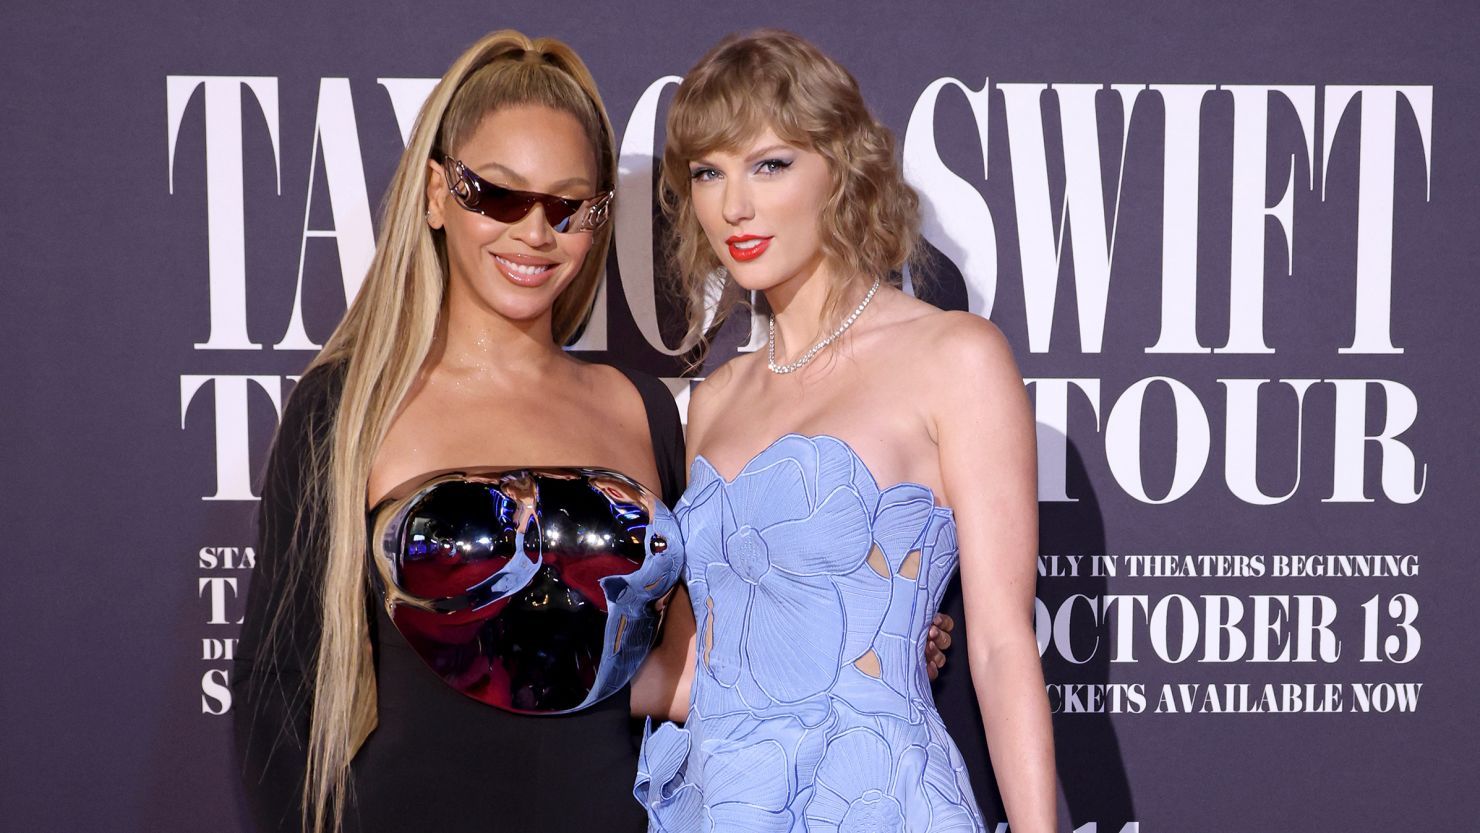 Beyoncé and Taylor Swift attend the "Taylor Swift: The Eras Tour" concert movie world premiere at AMC The Grove 14 on Wednesday in Los Angeles.